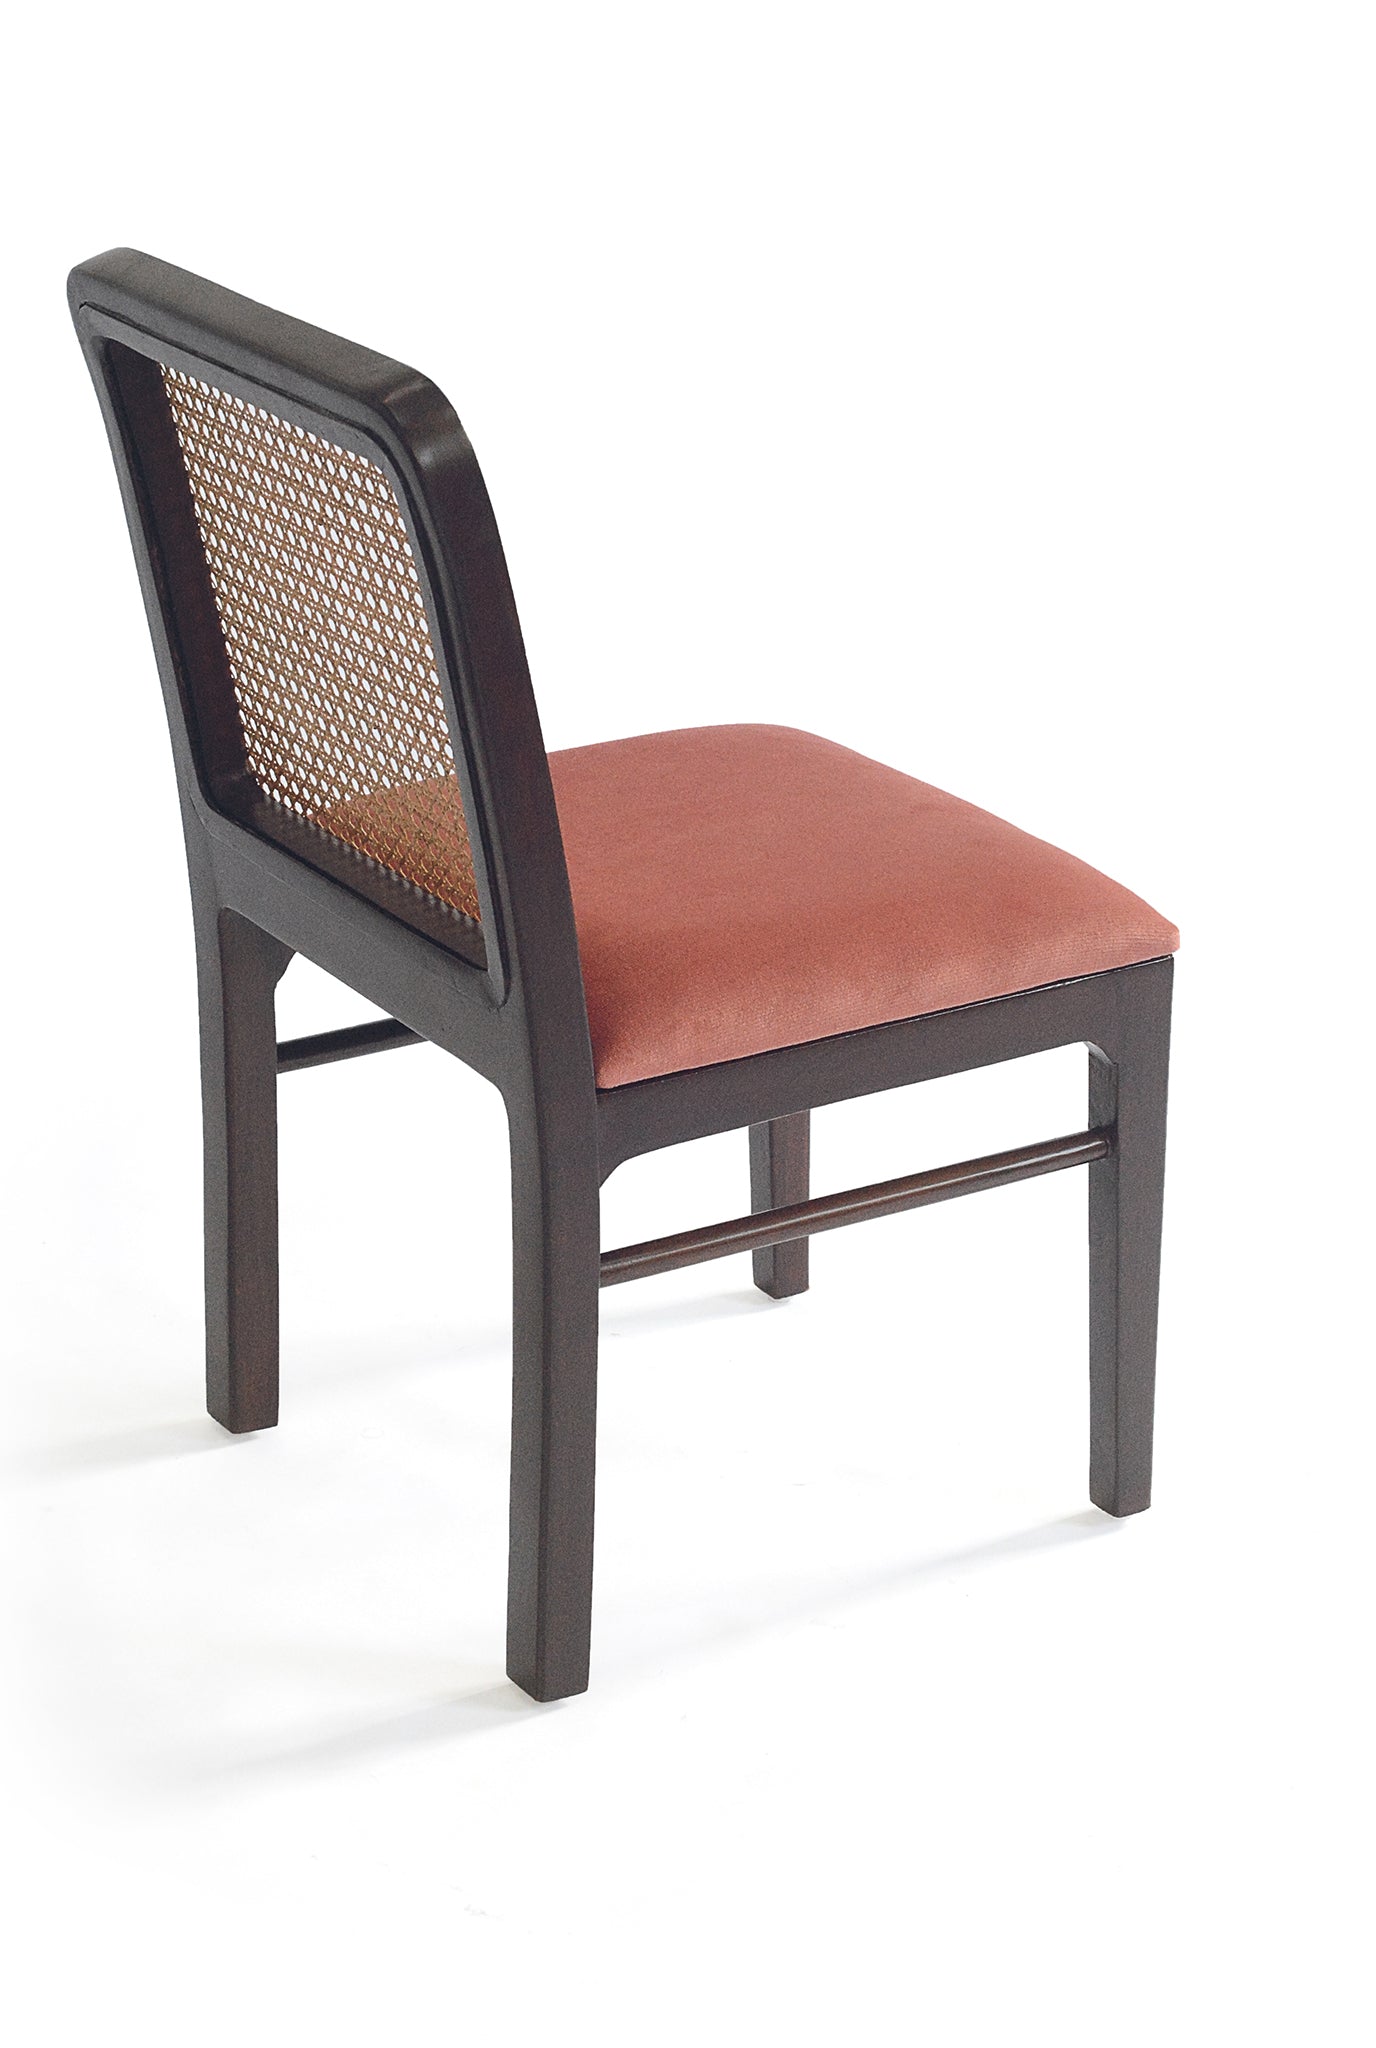 handcrafted-jodi-cane-wood-chair-sustainable